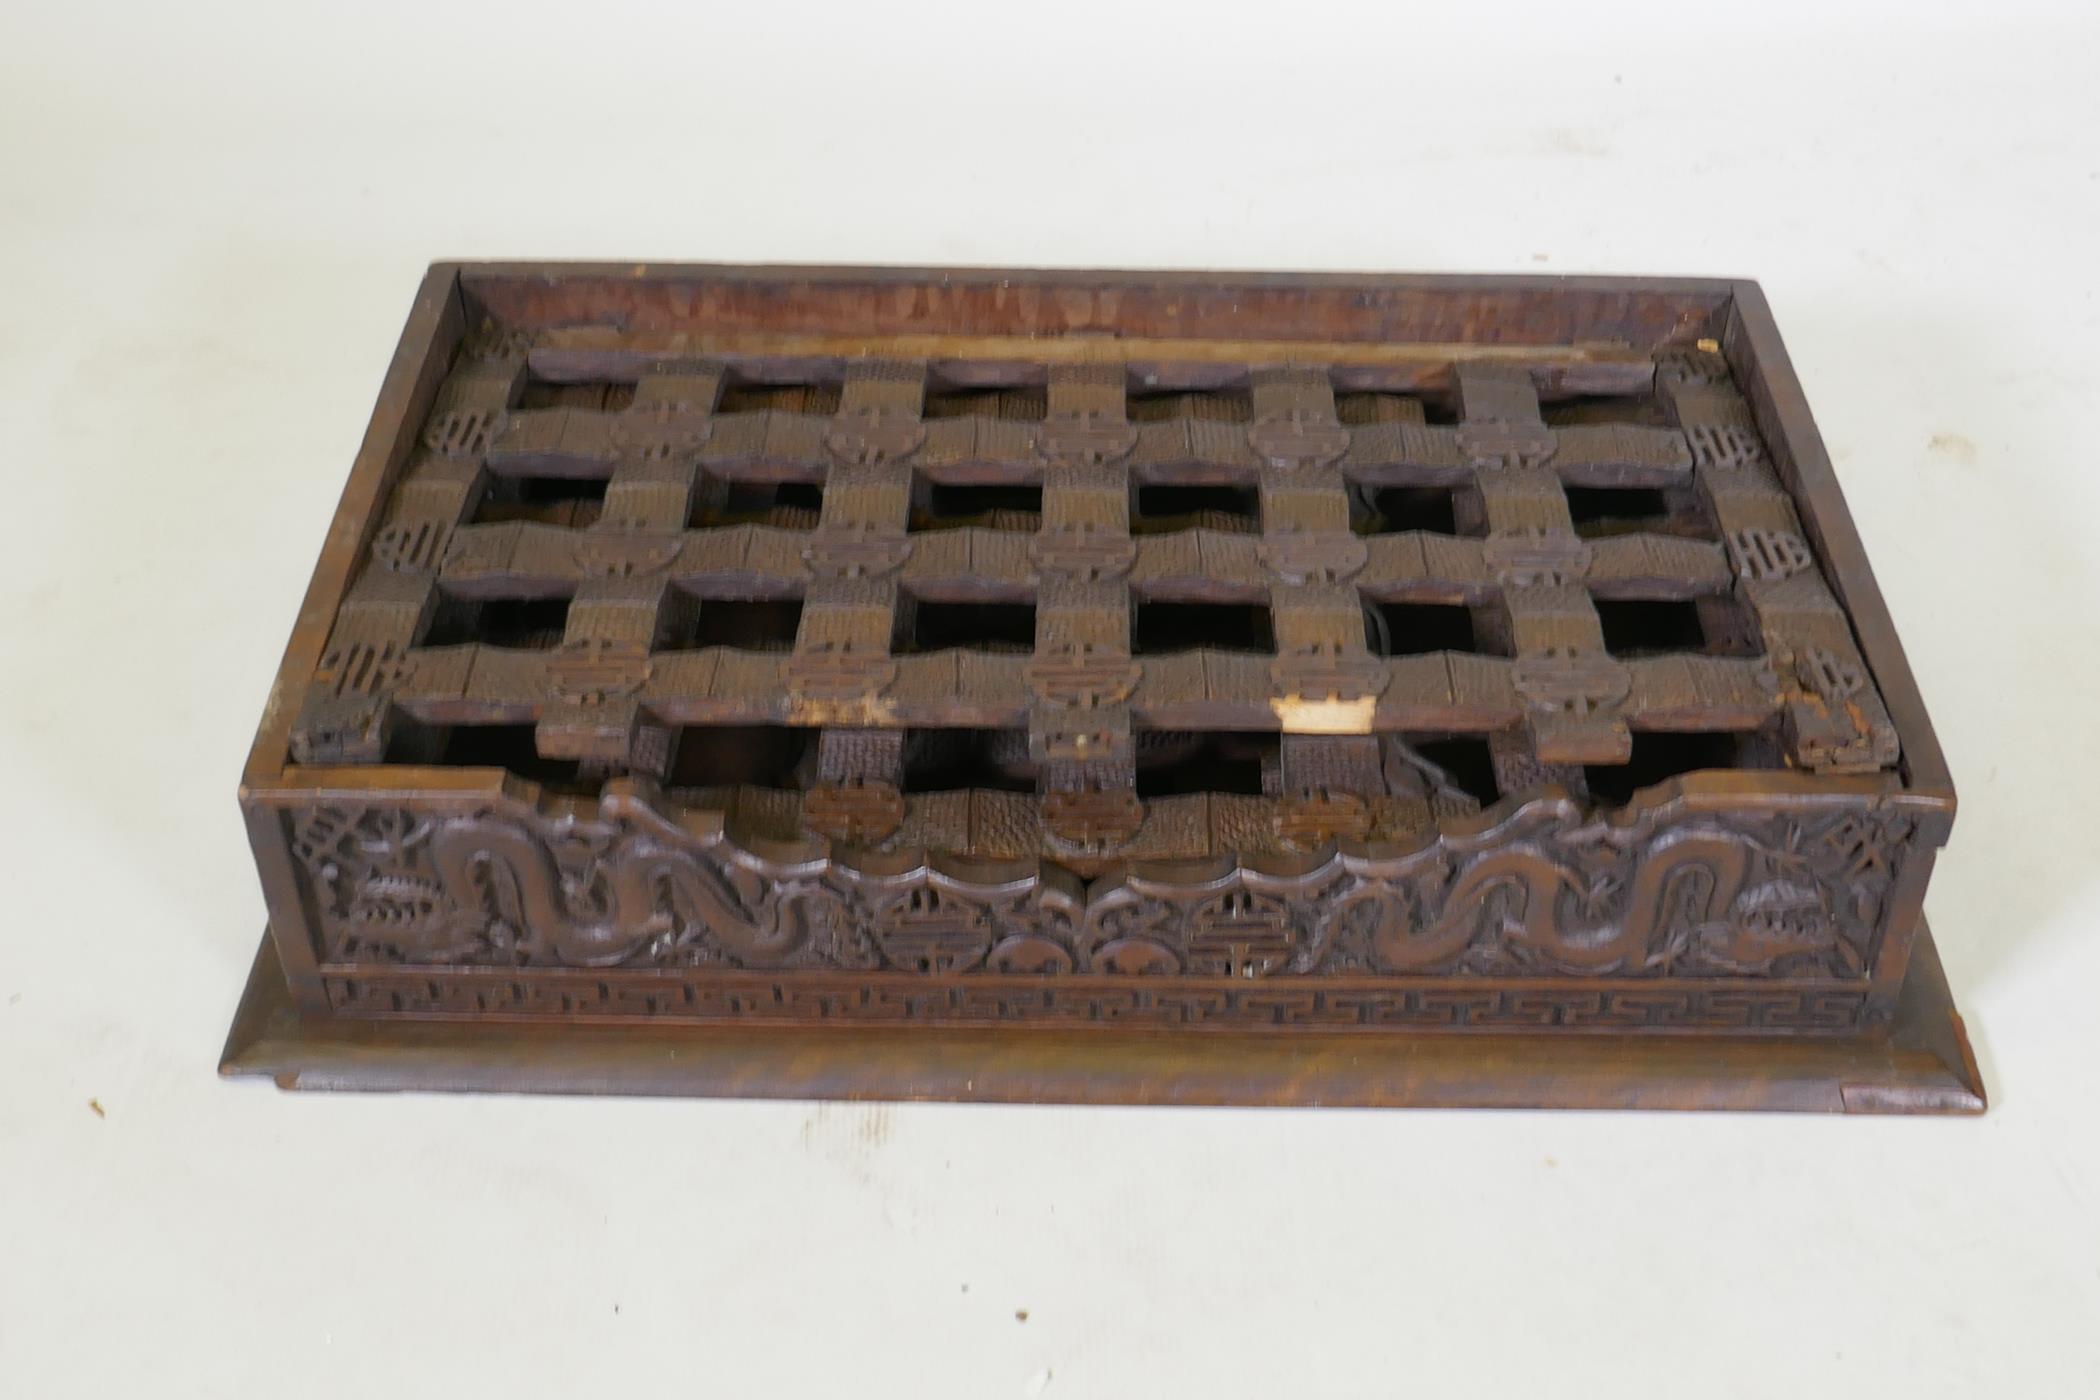 A C19th Chinese carved hardwood travel desk with a pierced folding base, decorated with dragons - Image 7 of 7